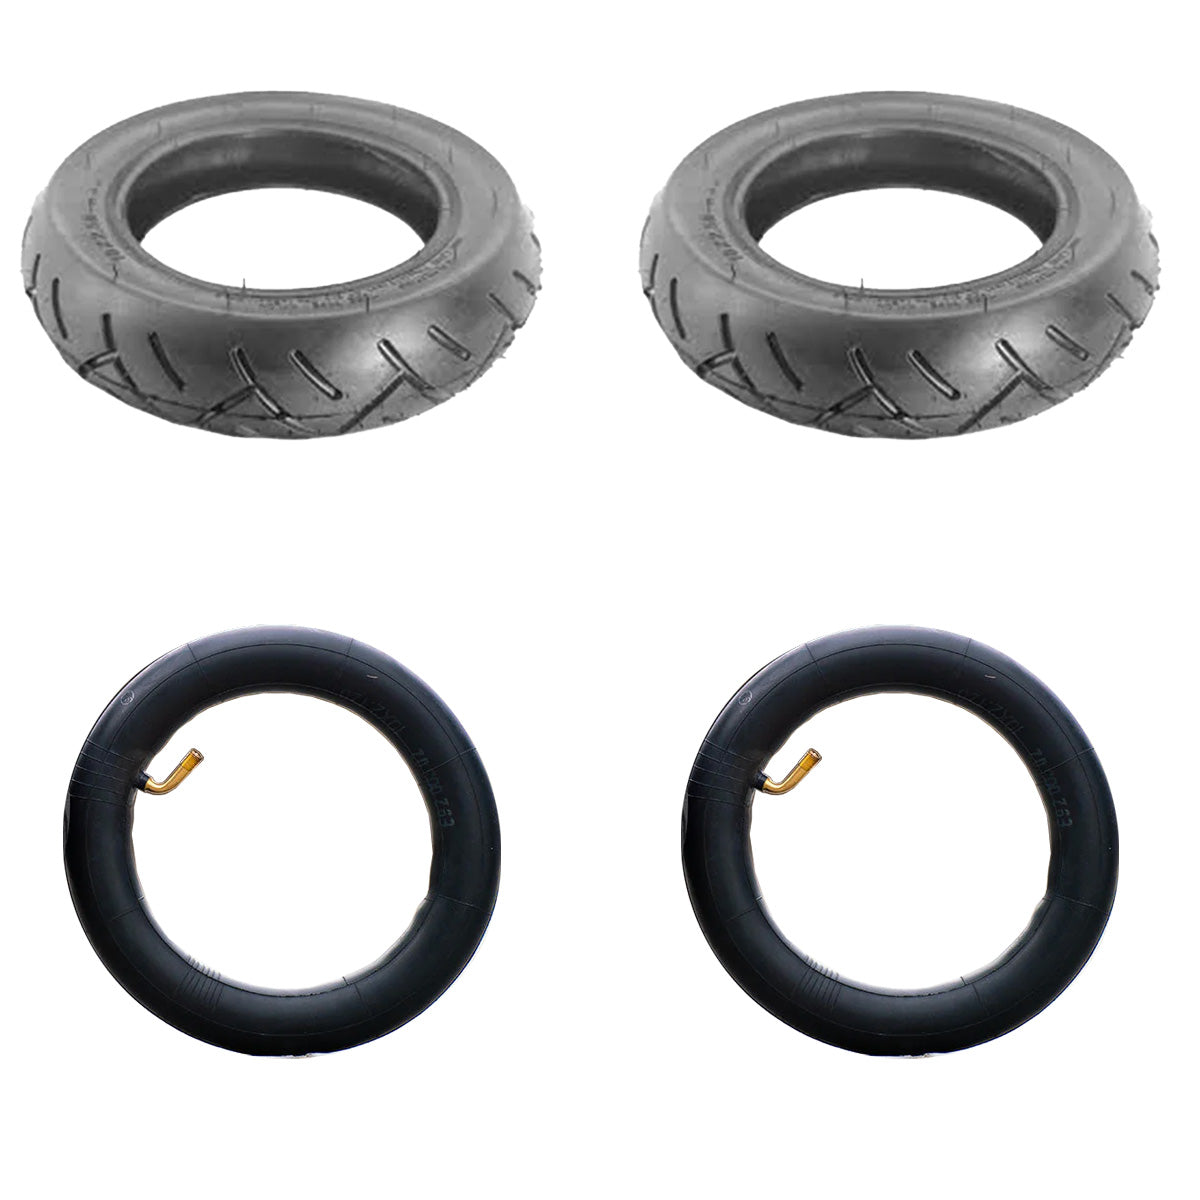 Pair of 10" Tyres and Tubes - Only fits Pure Air 2nd Gen scooters